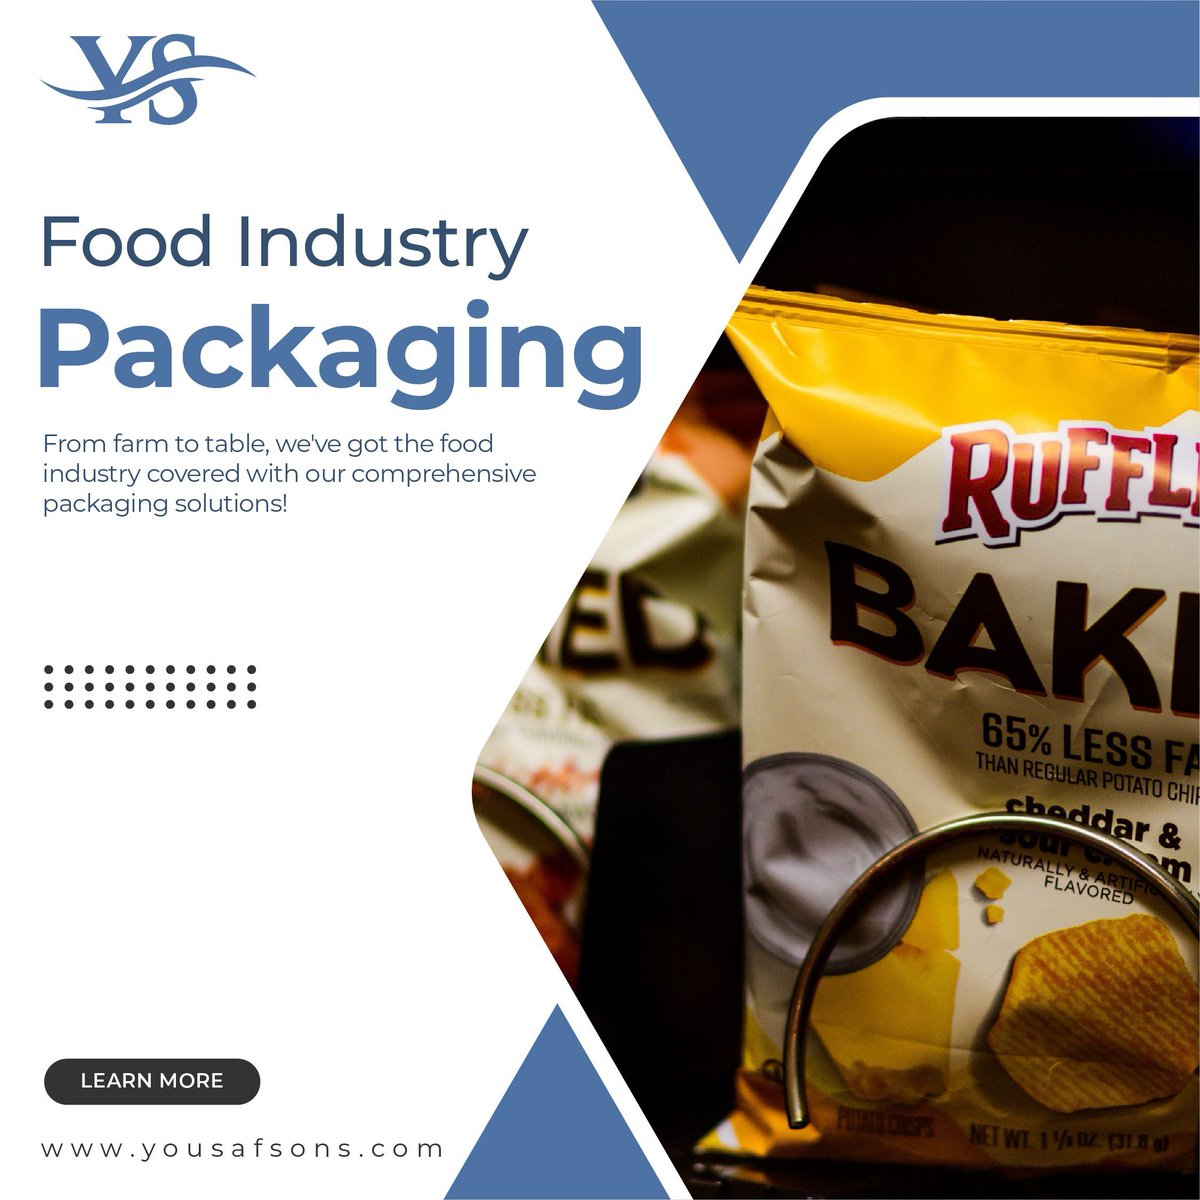 From farm to table, we've got the food industry covered with our comprehensive packaging solutions! 🍅🍲 Ensure freshness and safety every step of the way. #FoodIndustry #PackagingSolutions #FreshProduce #FoodQuality #FoodSafety #Preservation #QualityPackaging #FoodProtection